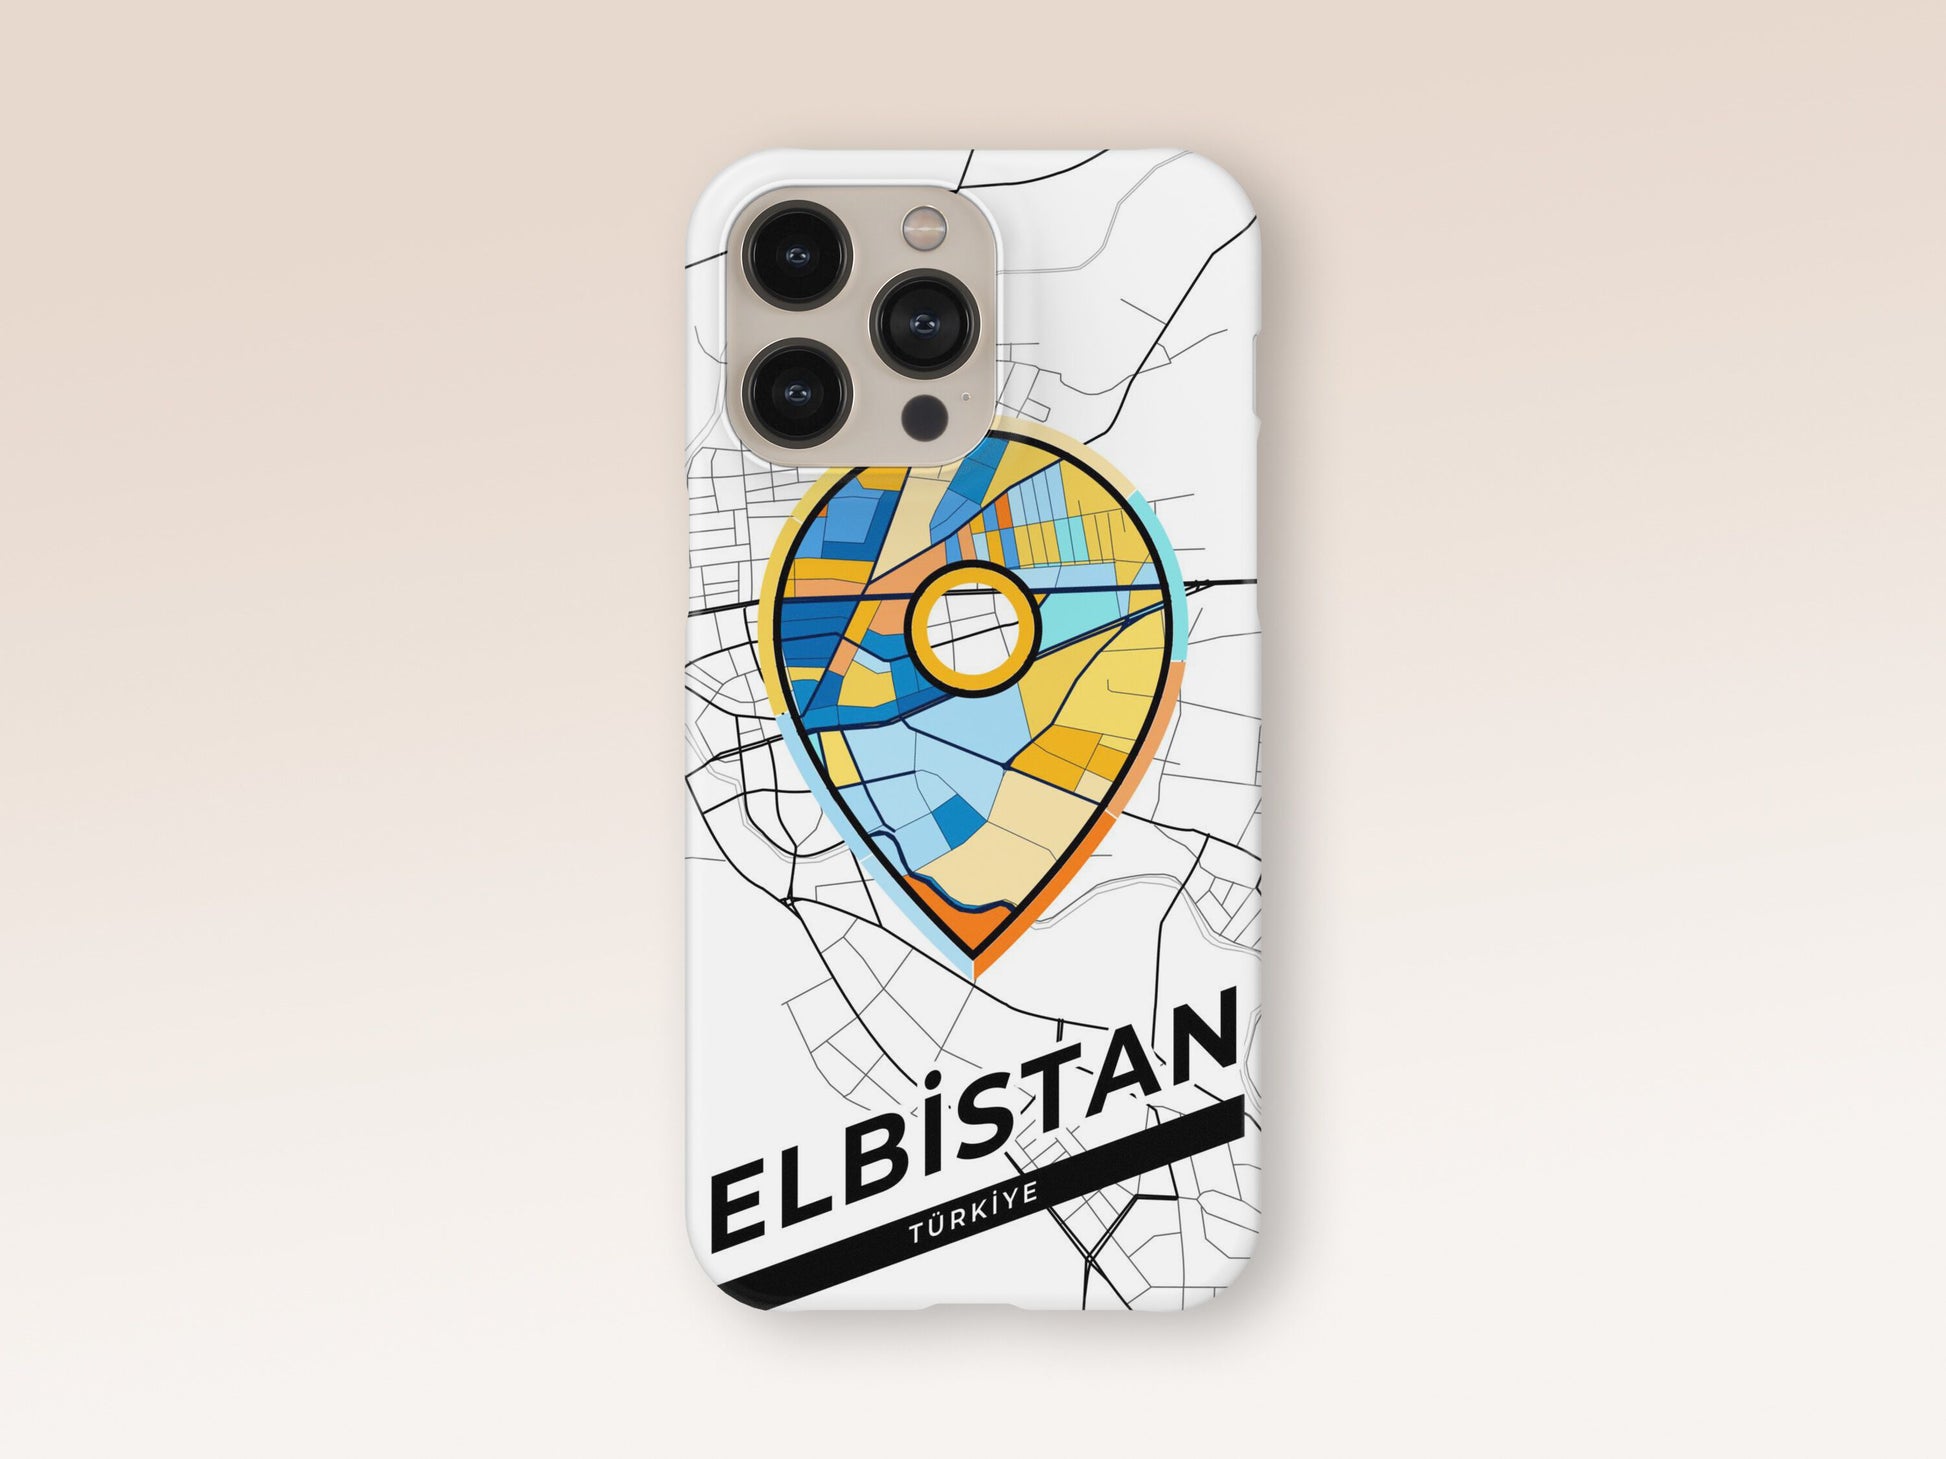 Elbistan Turkey slim phone case with colorful icon. Birthday, wedding or housewarming gift. Couple match cases. 1